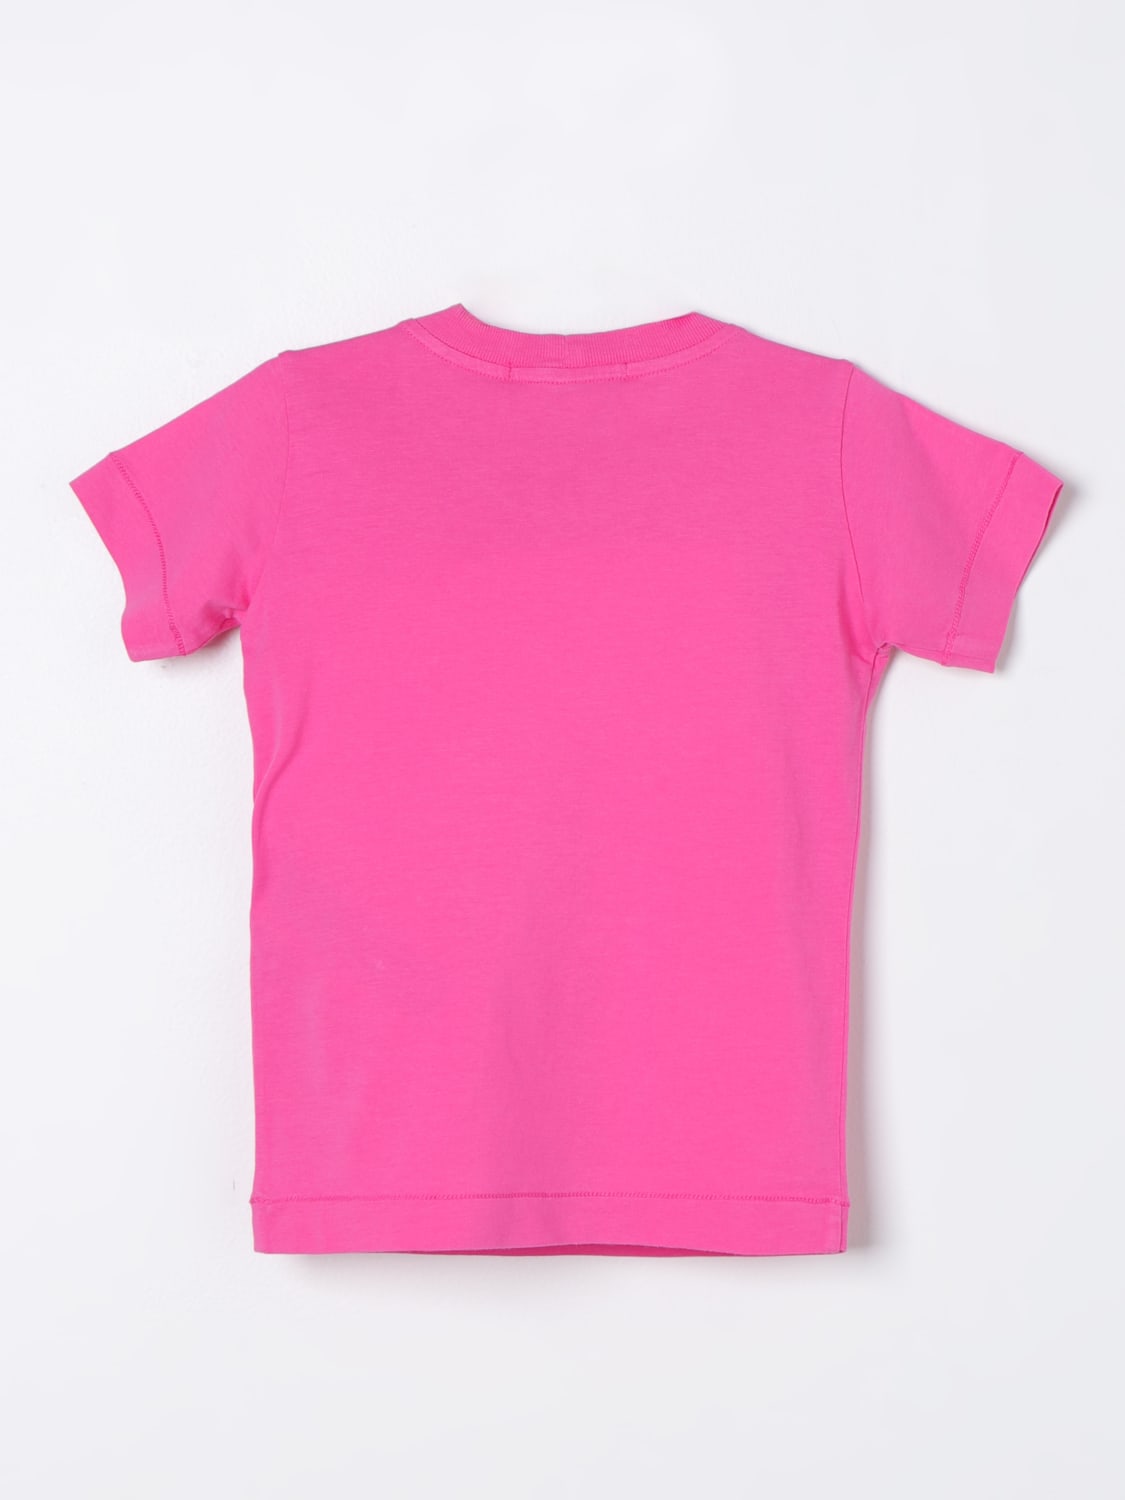 Childs Pink I Luv My Hubby Sparkle Stone T-Shirt Size 4/6 on eBid